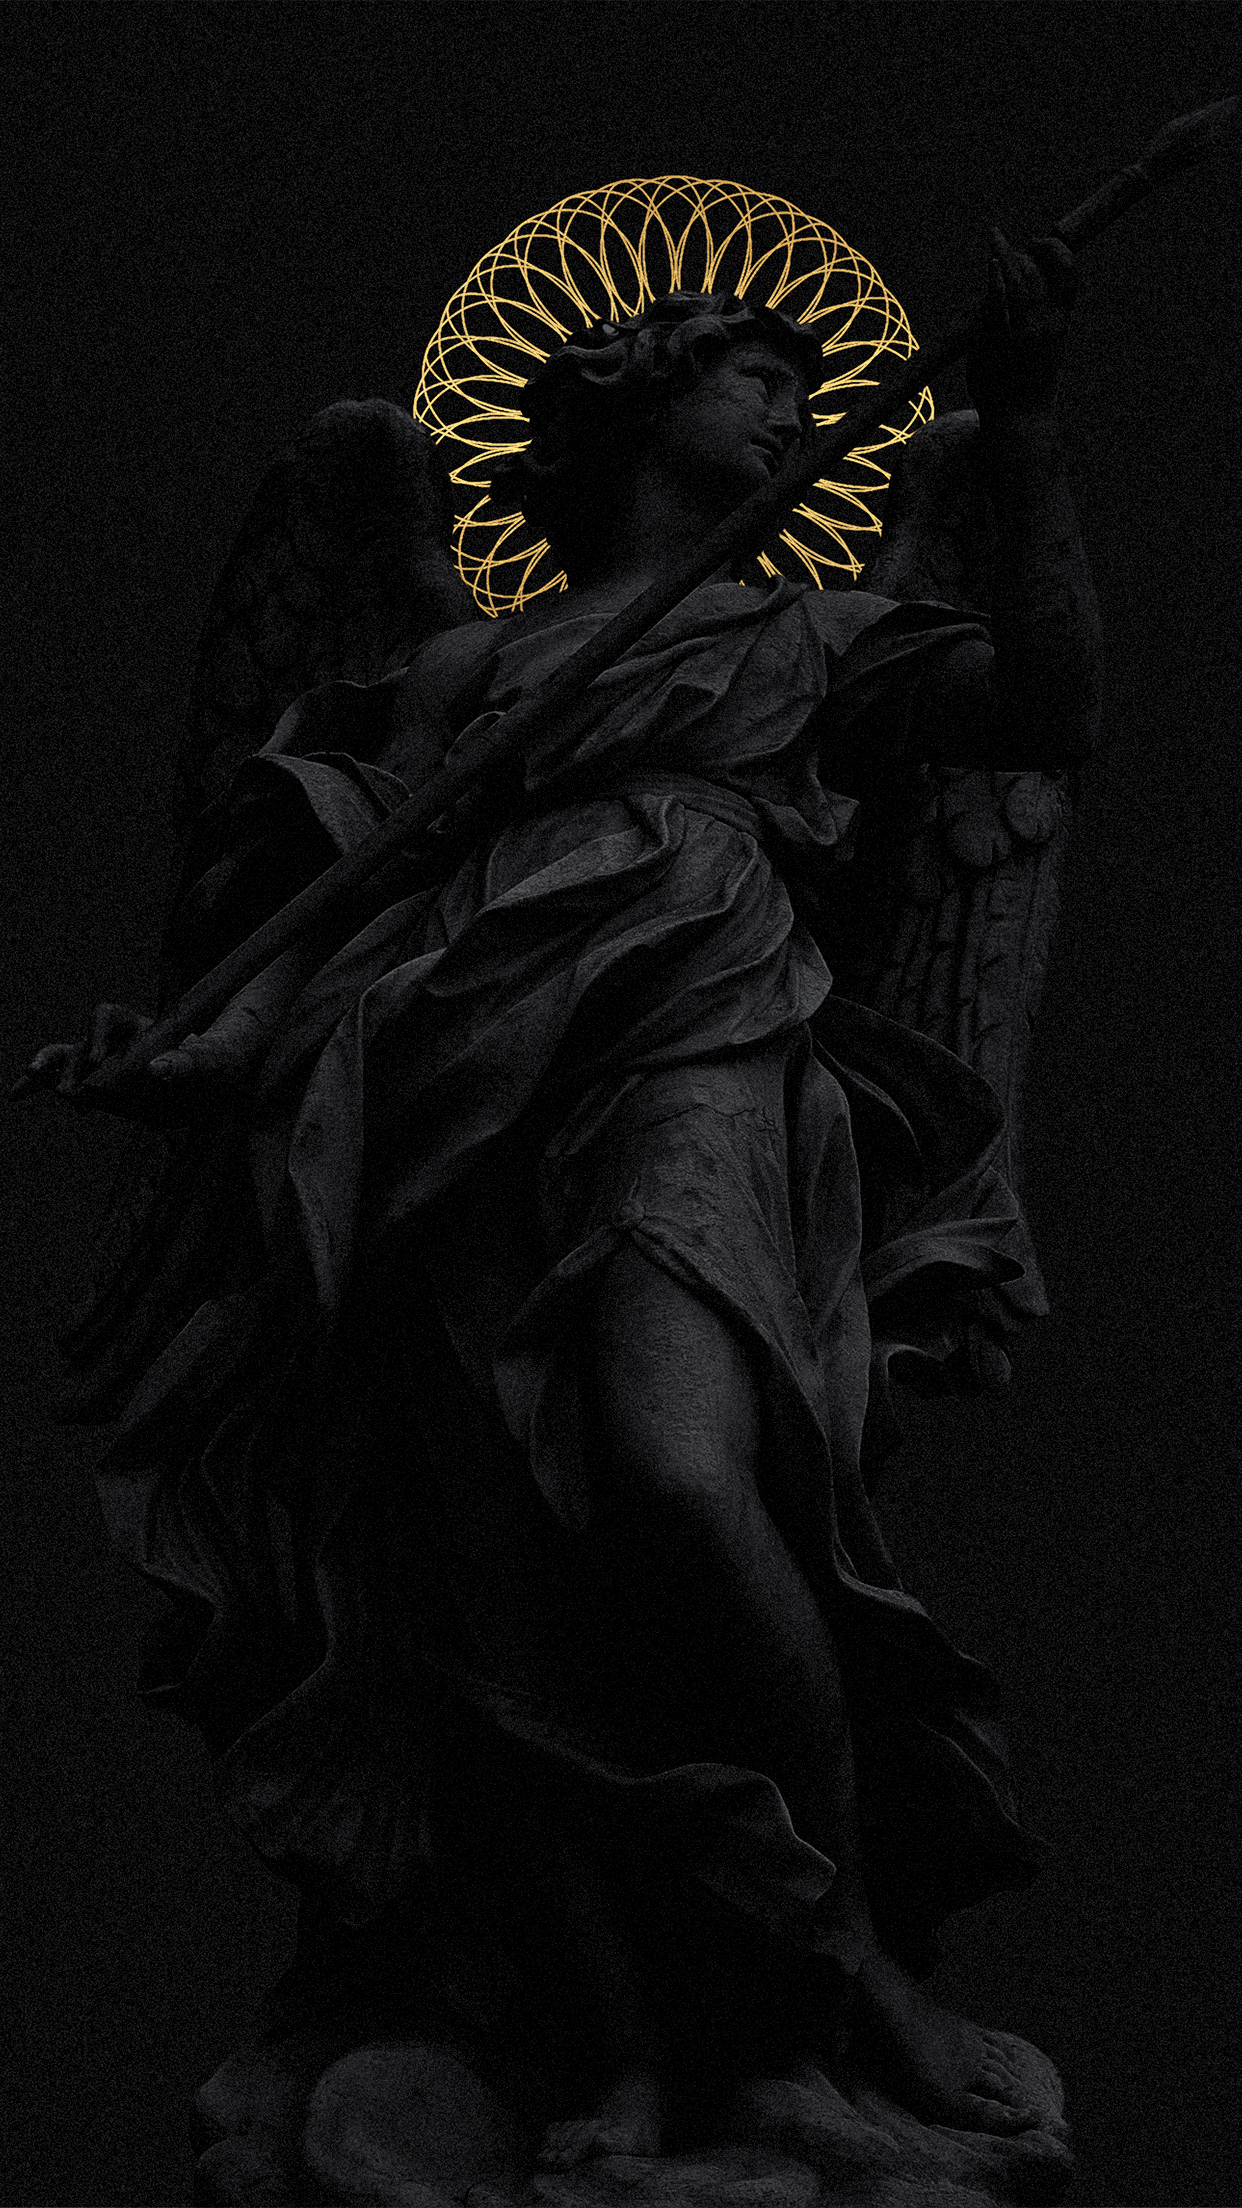 Here are some statuesque wallpaper from my phone (Amoled Friendly) hope you like!